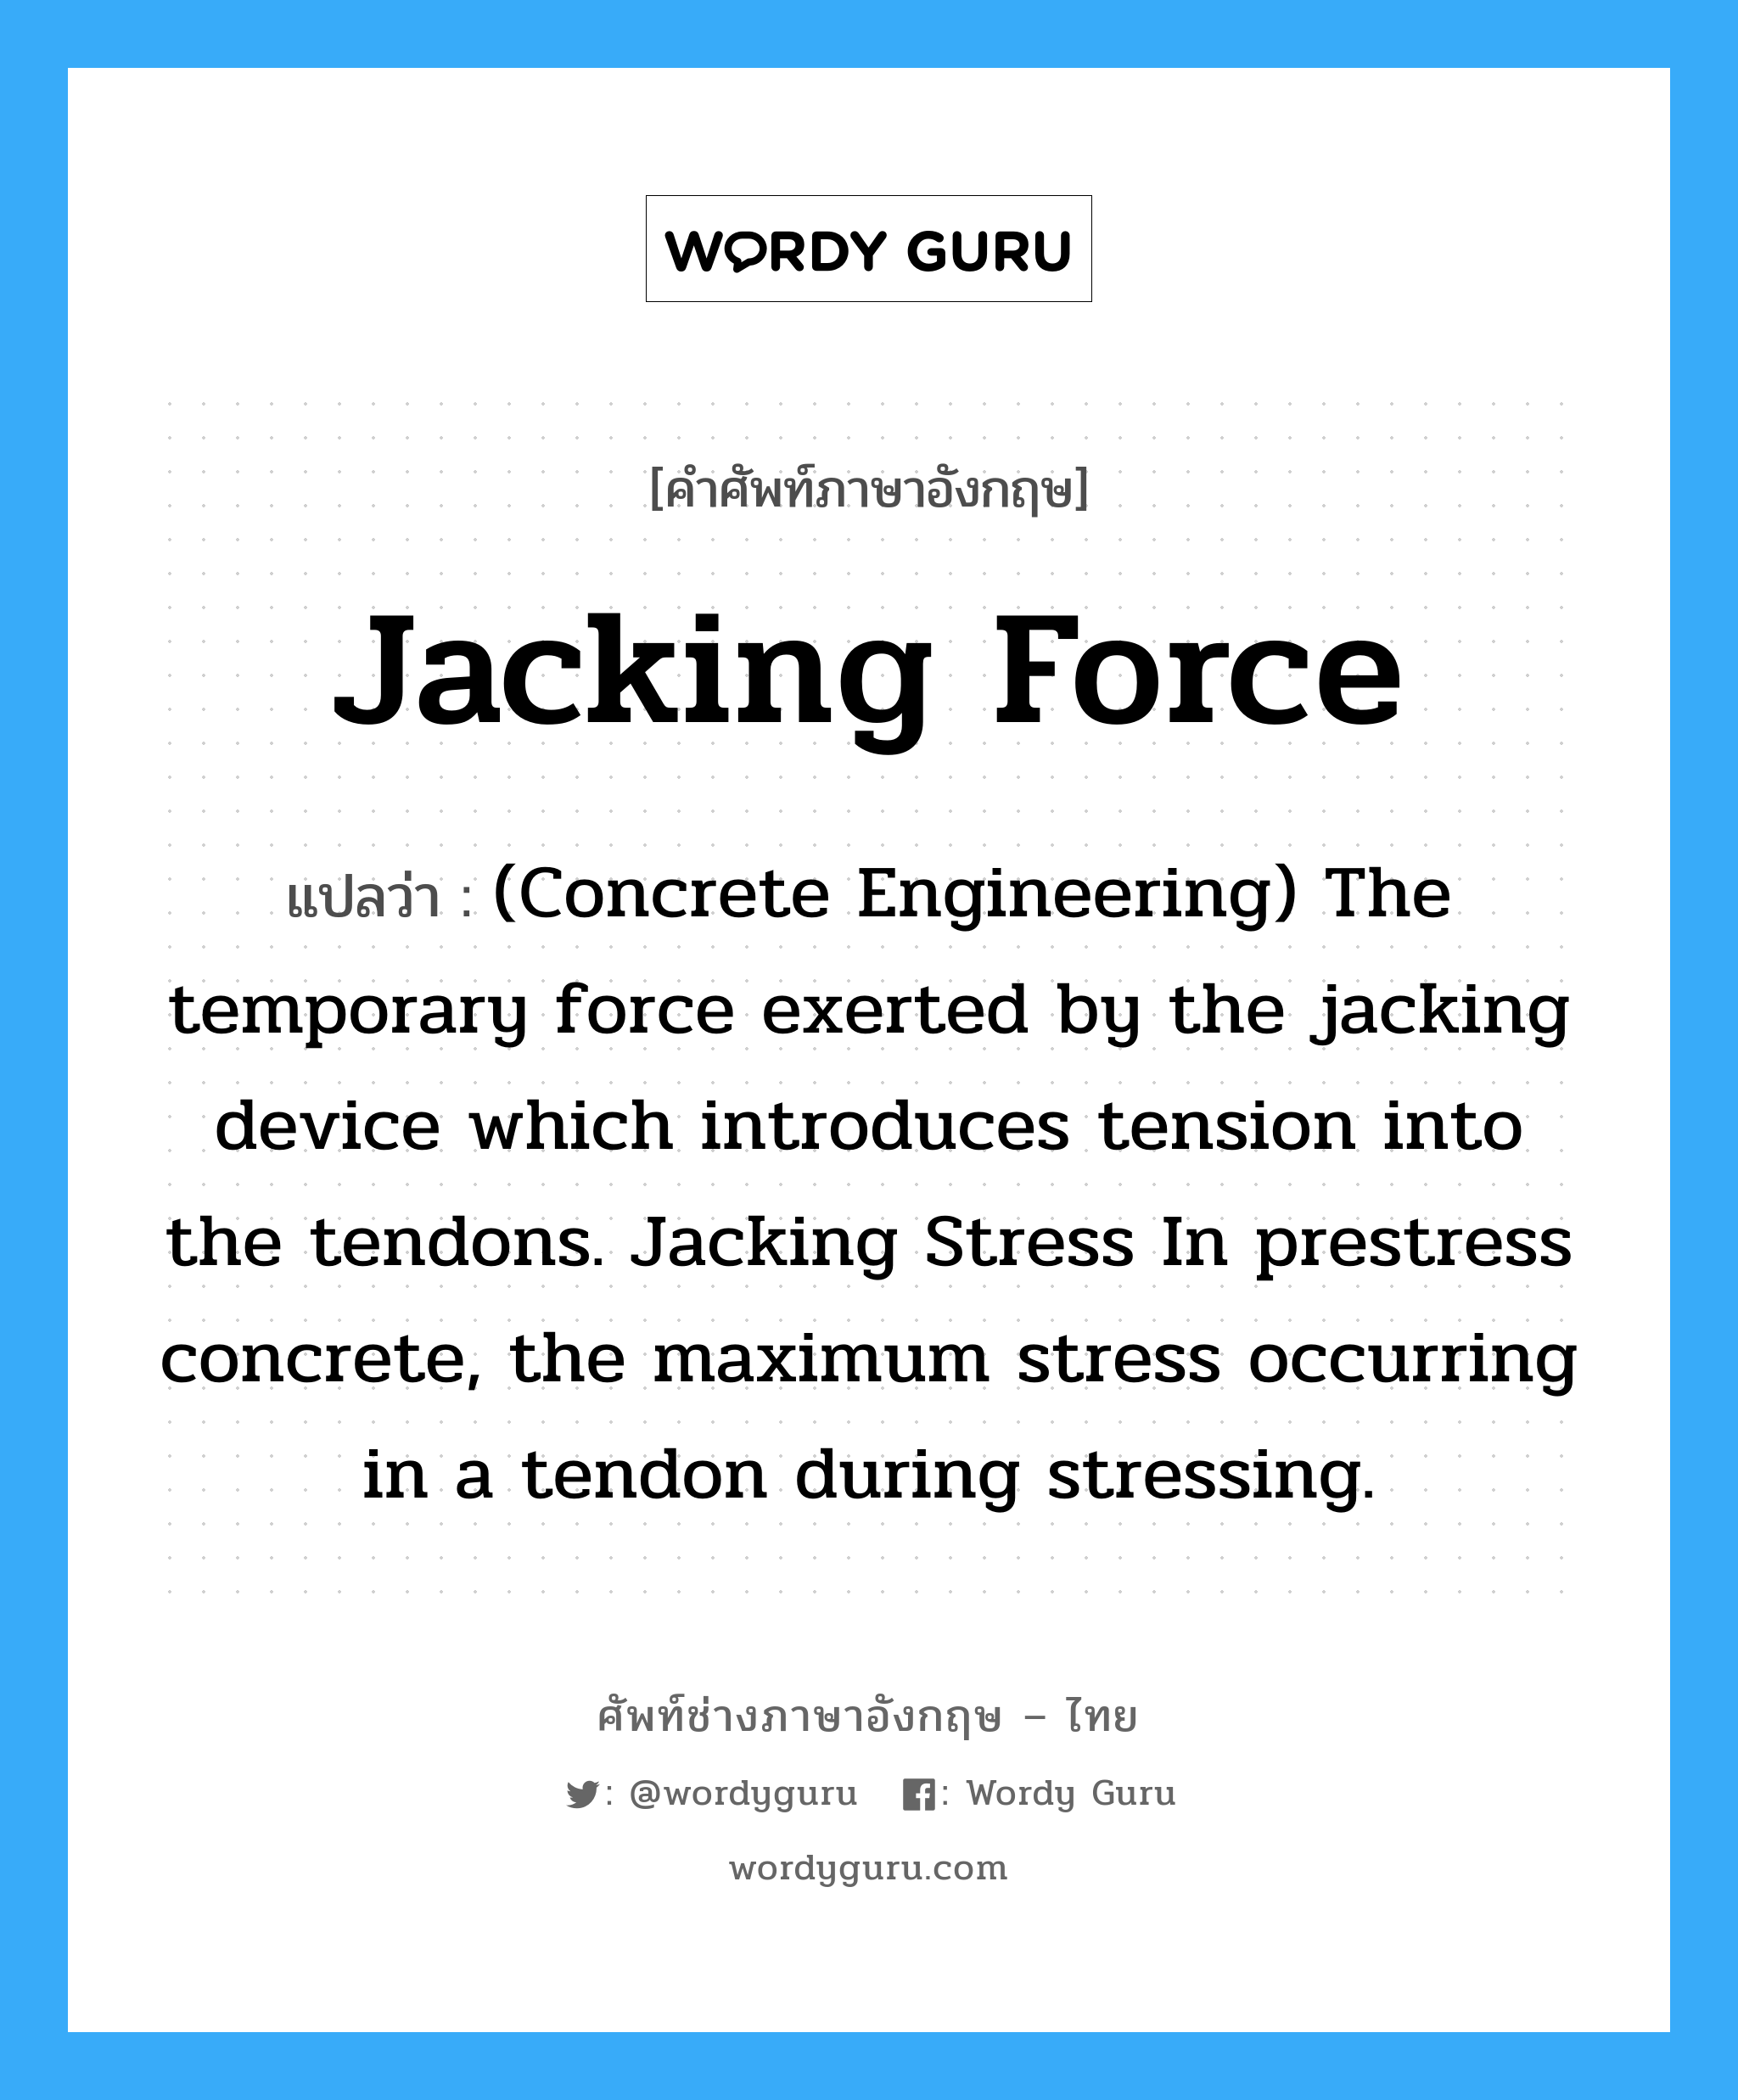 (Concrete Engineering) The temporary force exerted by the jacking device which introduces tension into the tendons. Jacking Stress In prestress concrete, the maximum stress occurring in a tendon during stressing. ภาษาอังกฤษ?, คำศัพท์ช่างภาษาอังกฤษ - ไทย (Concrete Engineering) The temporary force exerted by the jacking device which introduces tension into the tendons. Jacking Stress In prestress concrete, the maximum stress occurring in a tendon during stressing. คำศัพท์ภาษาอังกฤษ (Concrete Engineering) The temporary force exerted by the jacking device which introduces tension into the tendons. Jacking Stress In prestress concrete, the maximum stress occurring in a tendon during stressing. แปลว่า Jacking Force